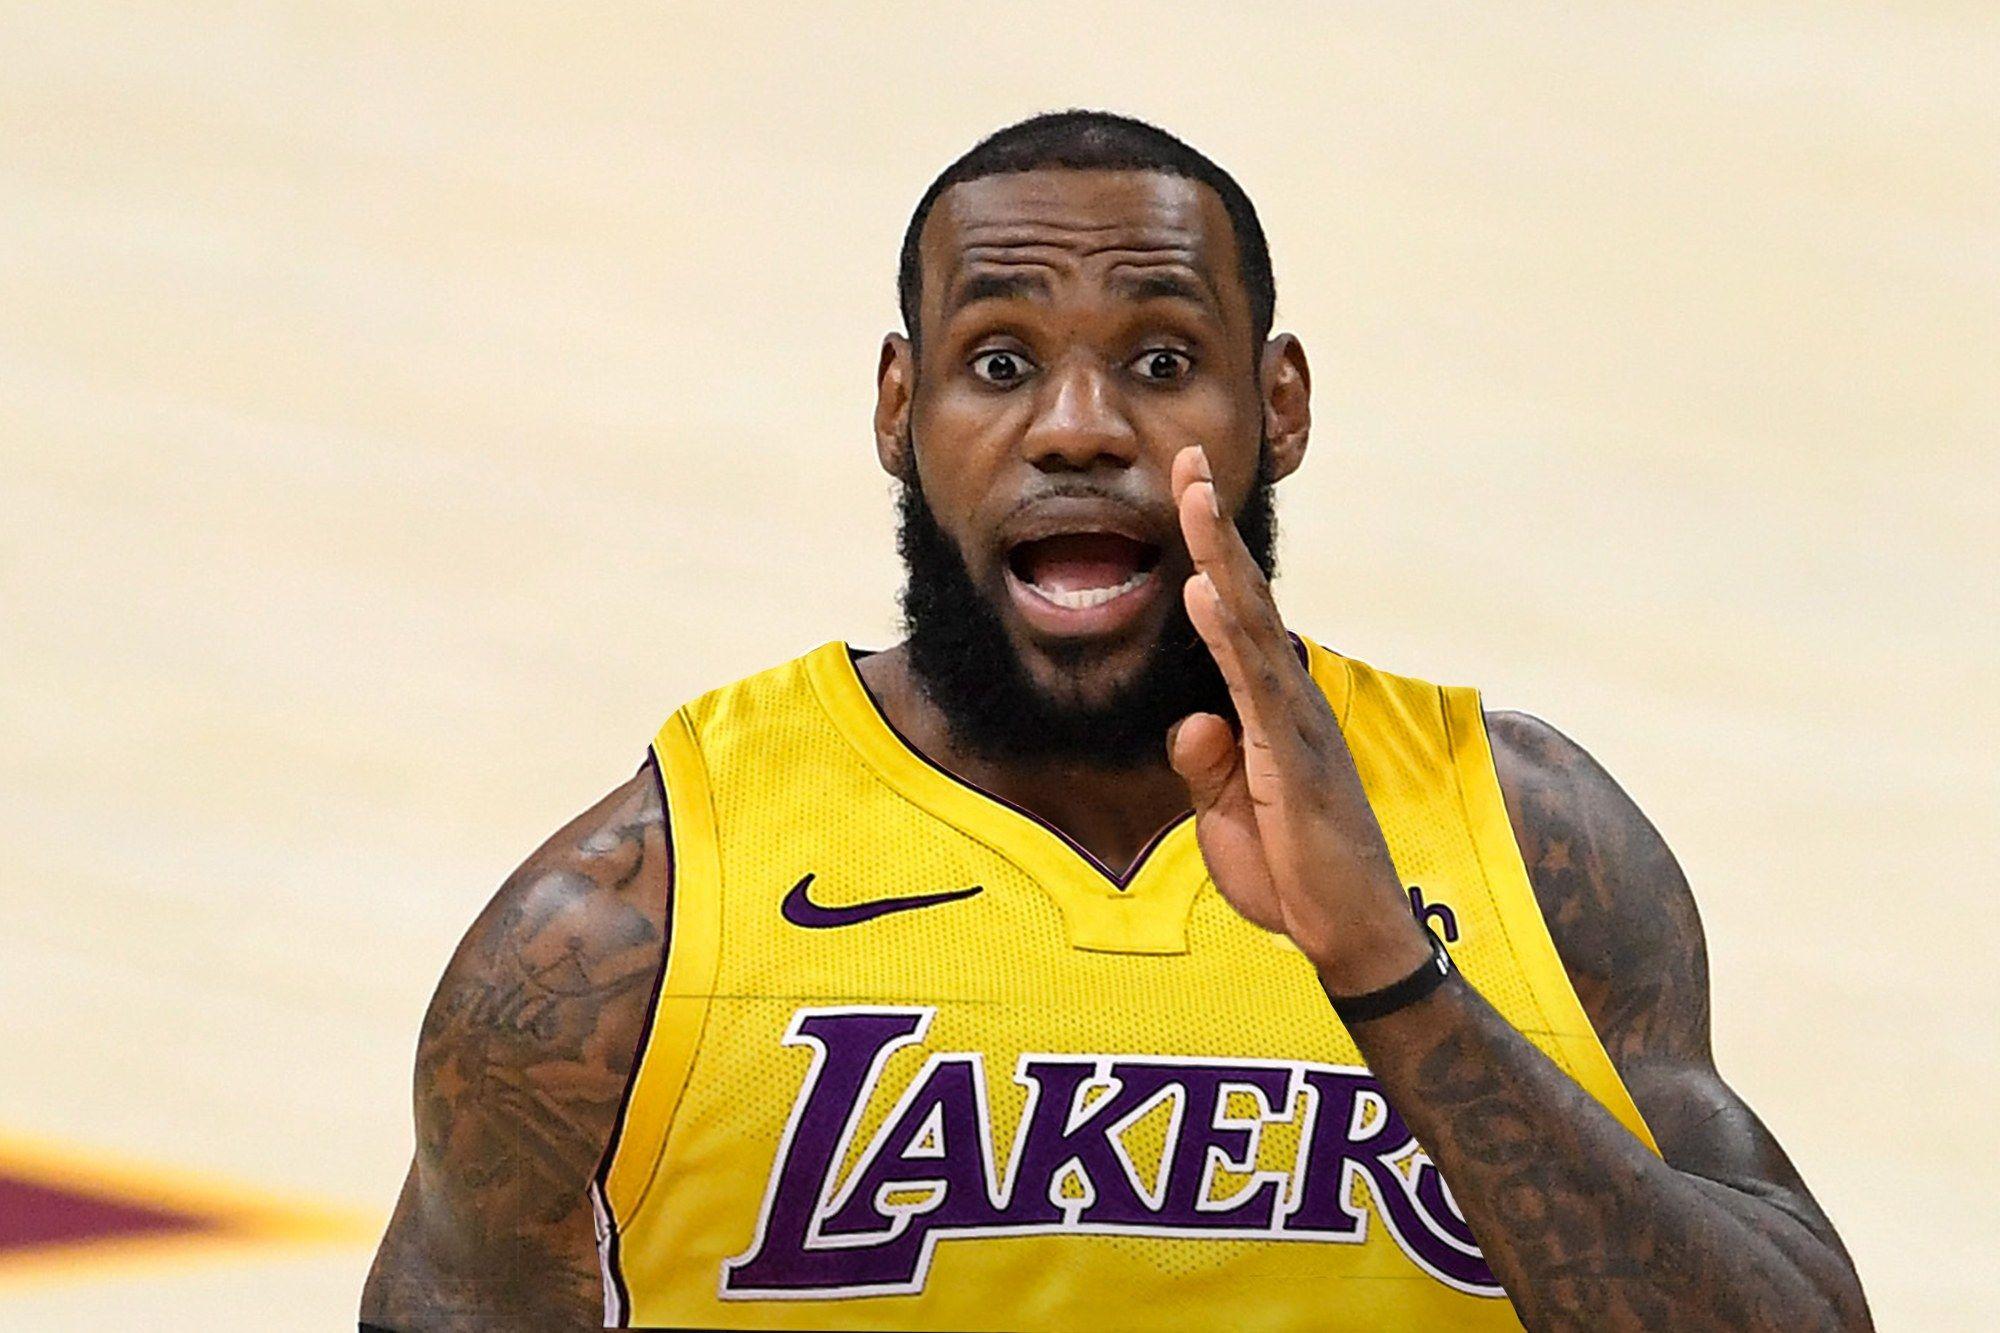 Lebron James News, In Depth Articles, Picture & Videos